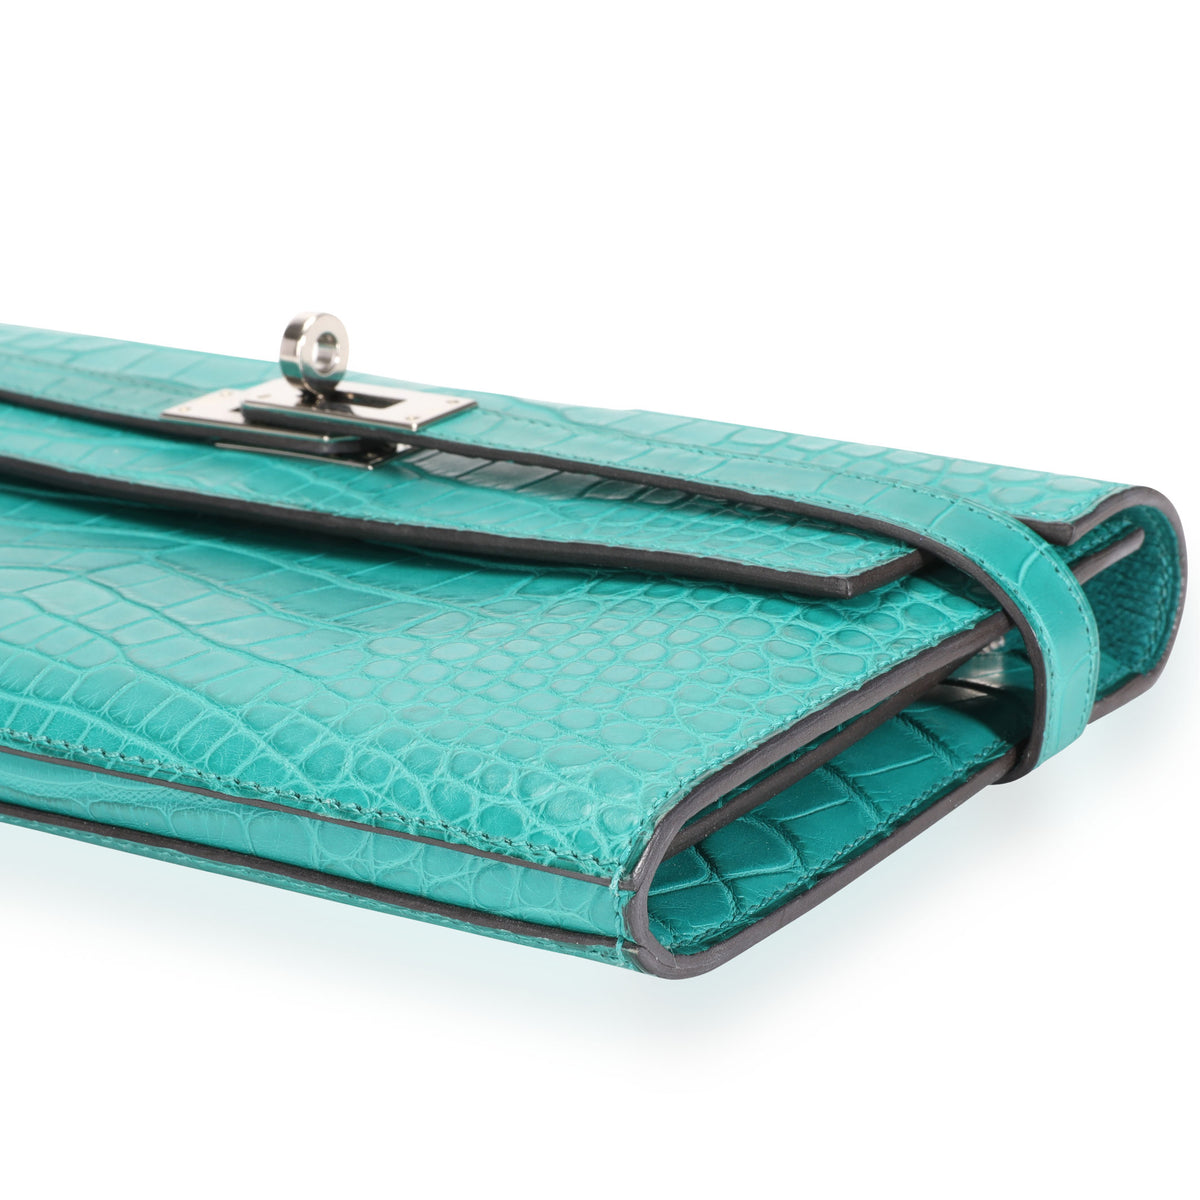 Hermes Blue Alligator Wallet with Removable Coin Purse - Handbags